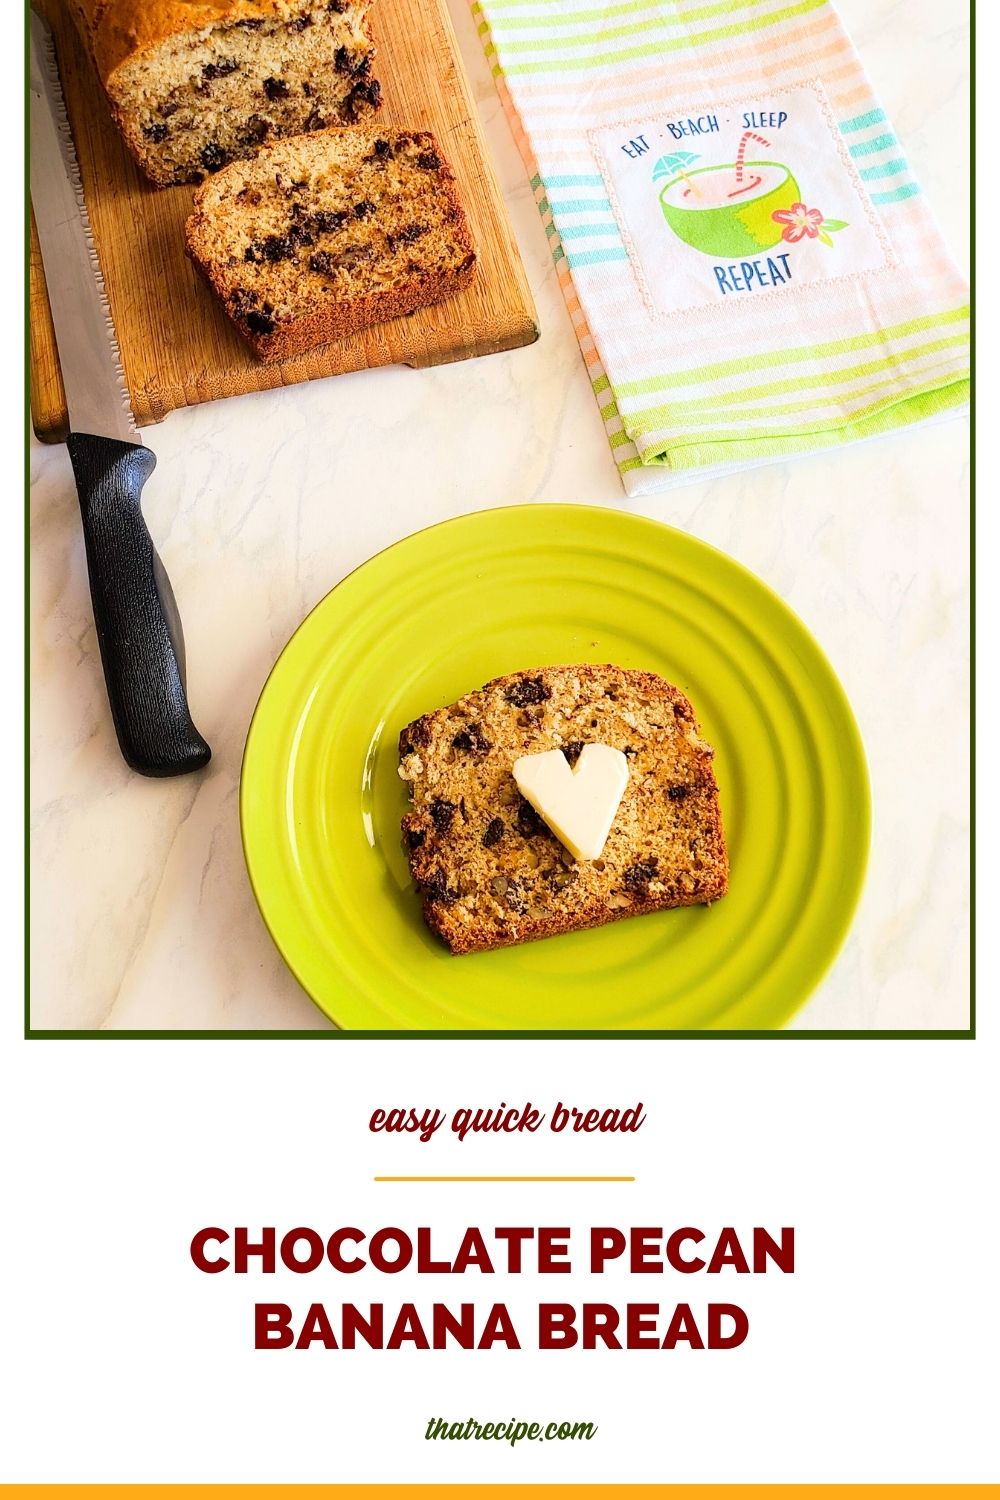 slice of chocolate pecan banana bread with loaf of bread